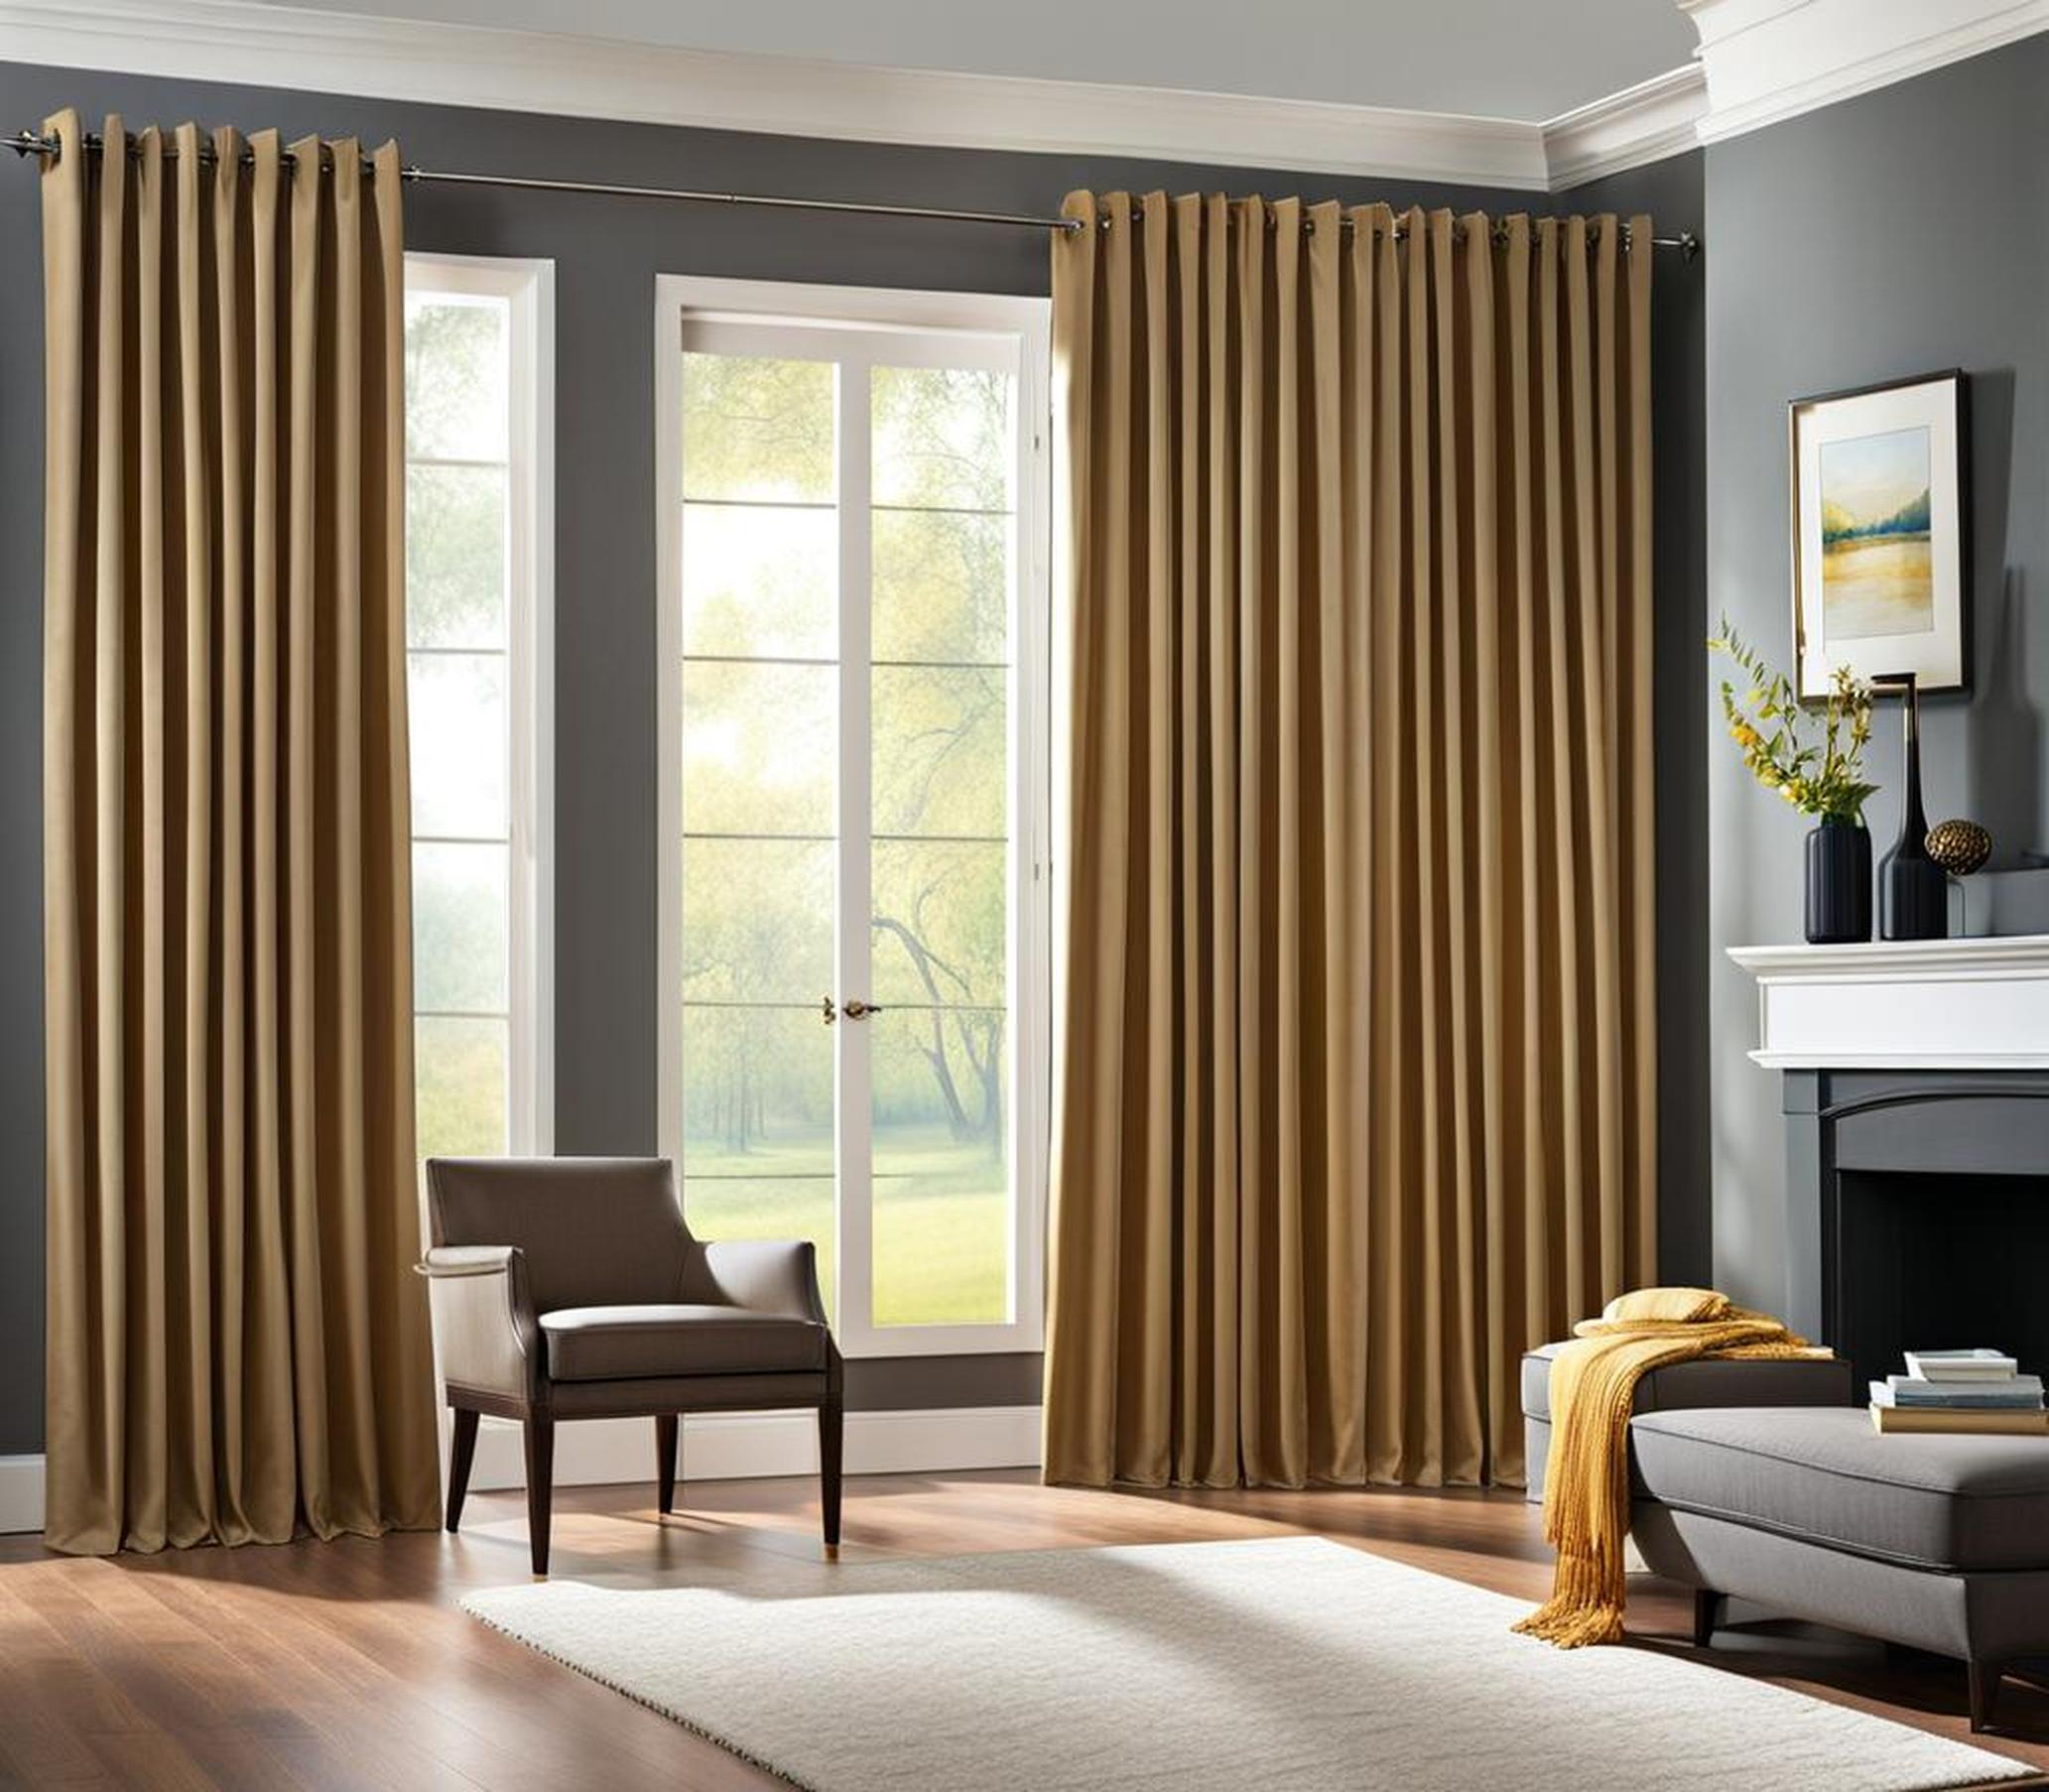 72 inch wide blackout curtains